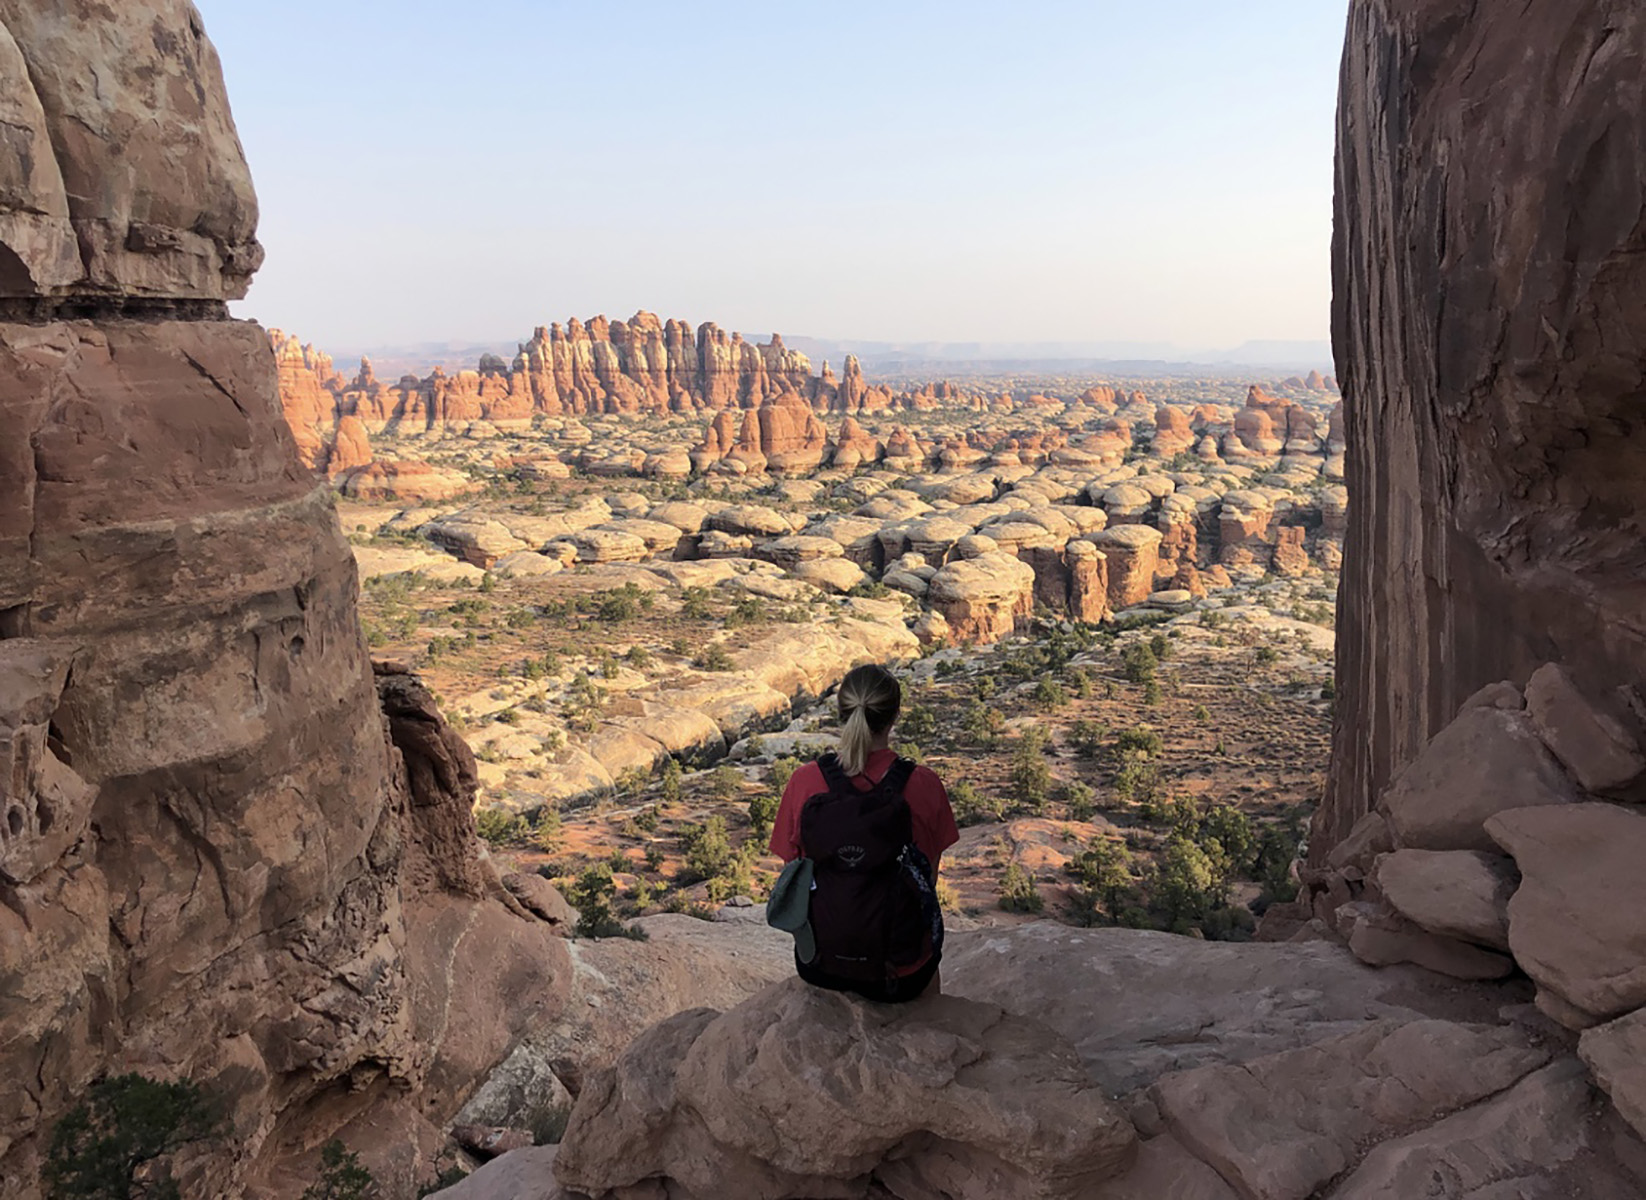 A hiker sits and gazes out over Needles Overlook